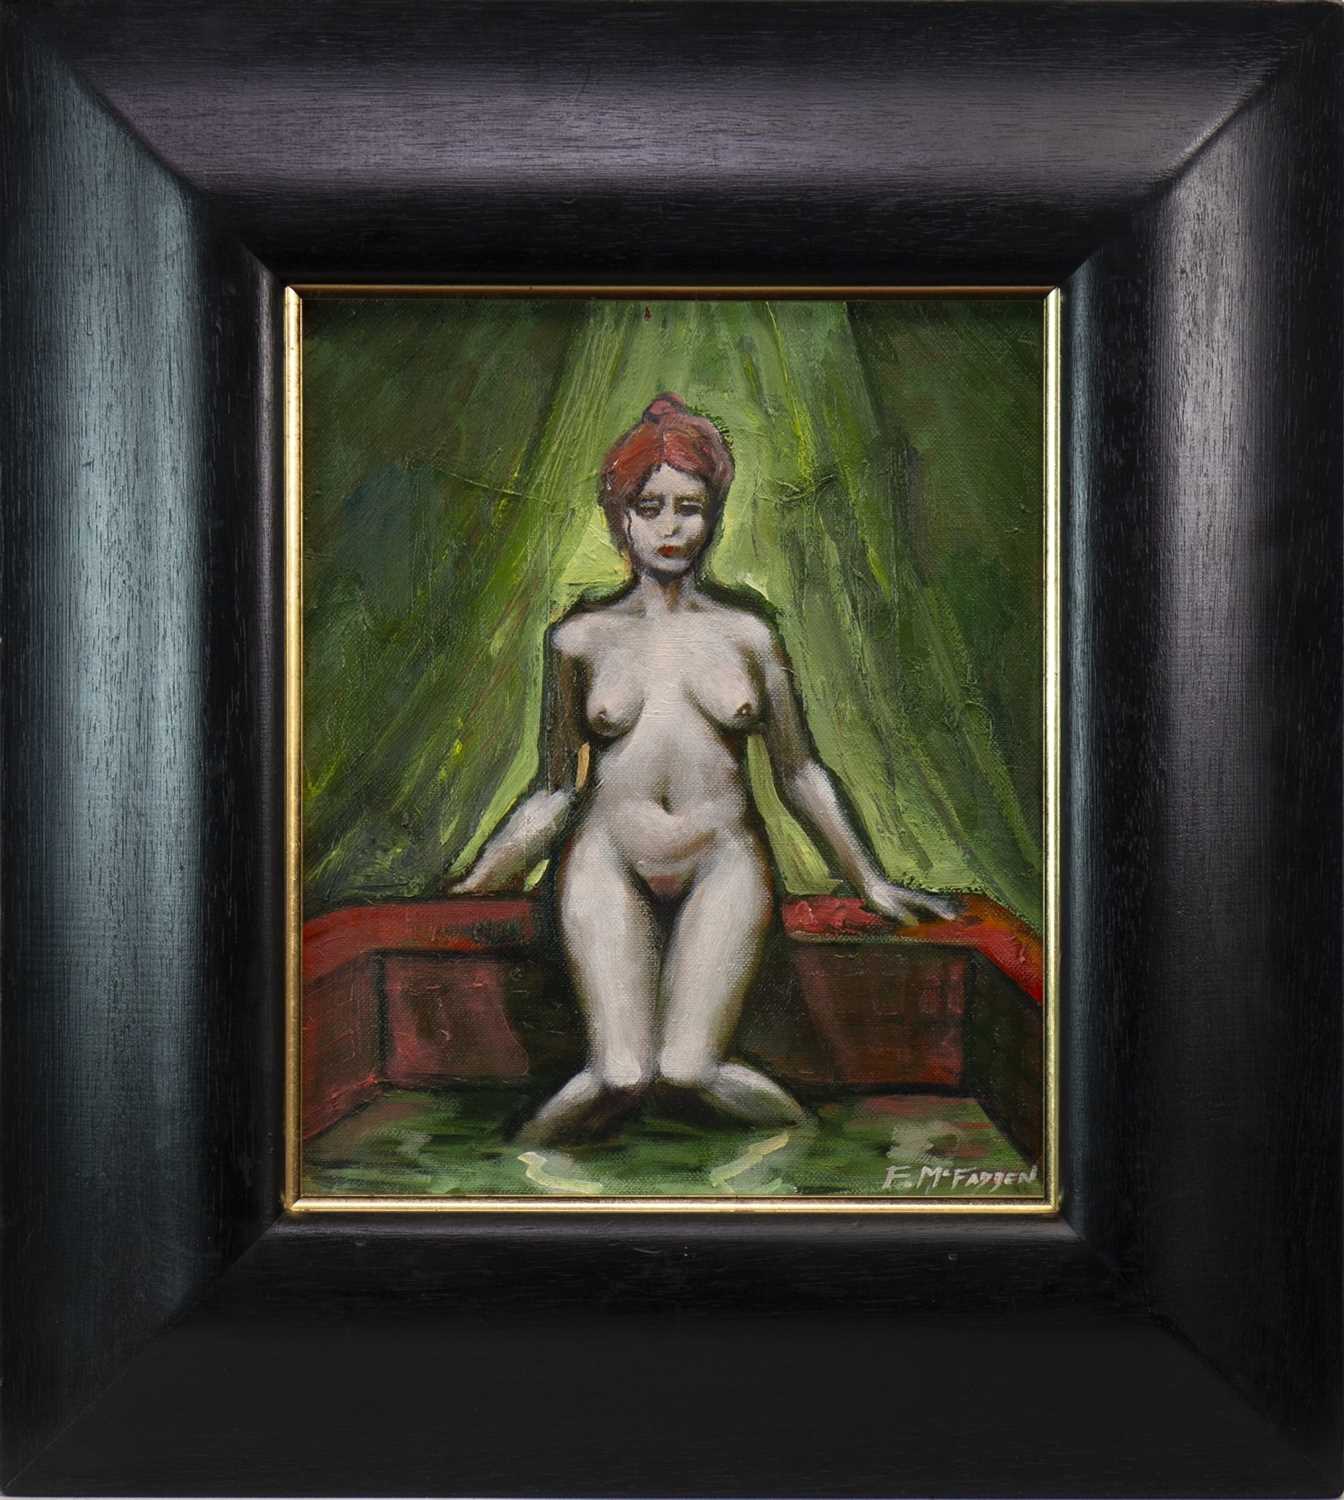 Lot 743 - NUDE IN THE LOUNGE, AN OIL BY FRANK MCFADDEN